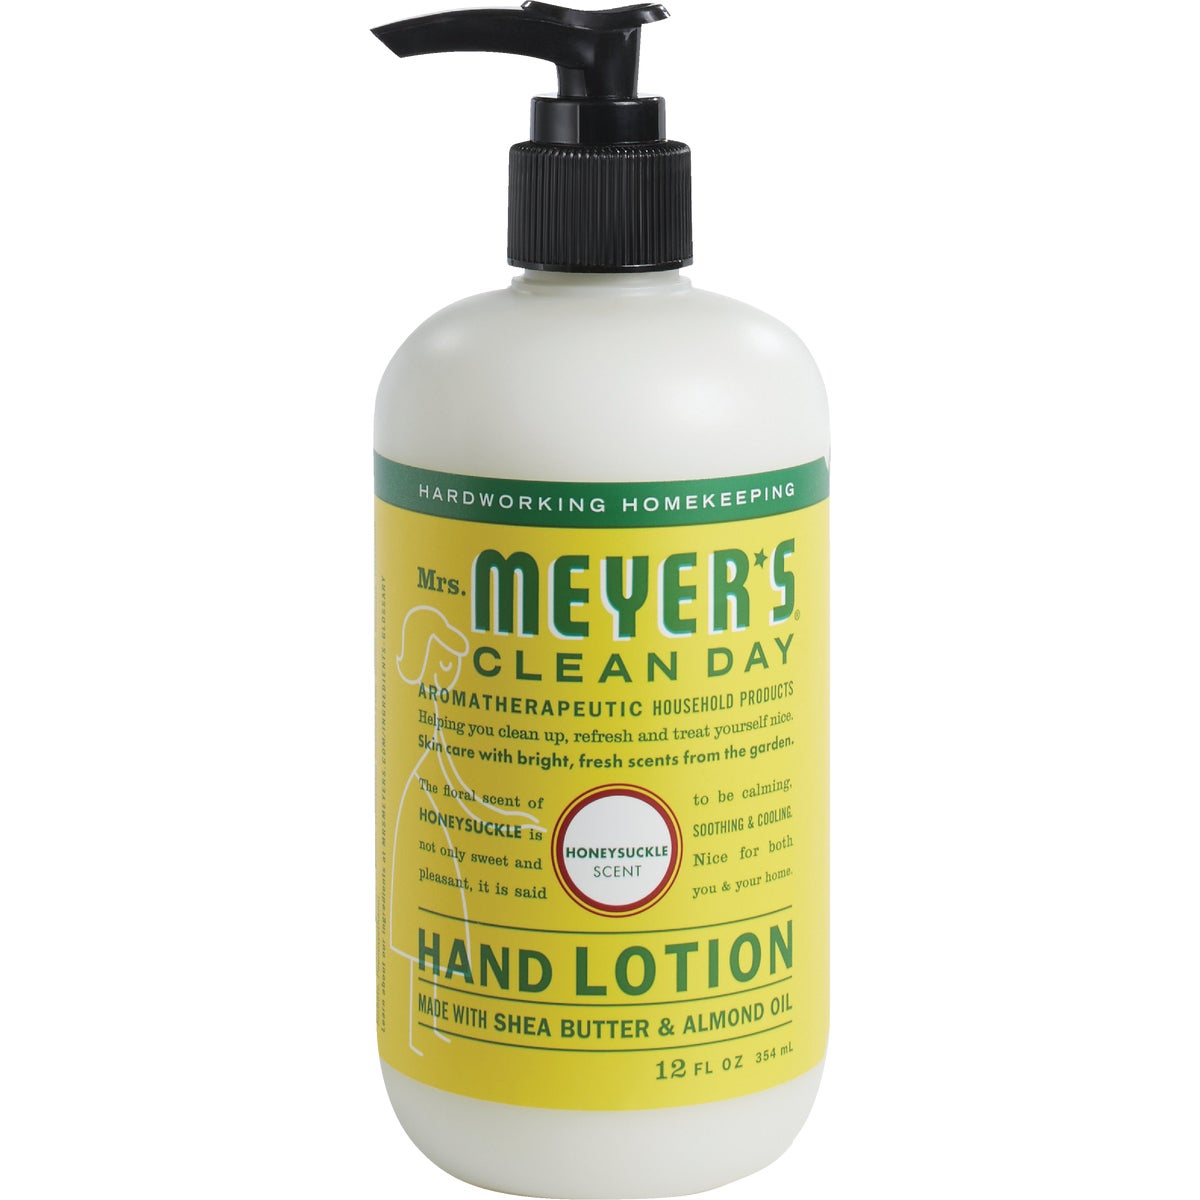 Mrs. Meyer's Clean Day 12 Oz. Honeysuckle Hand Lotion